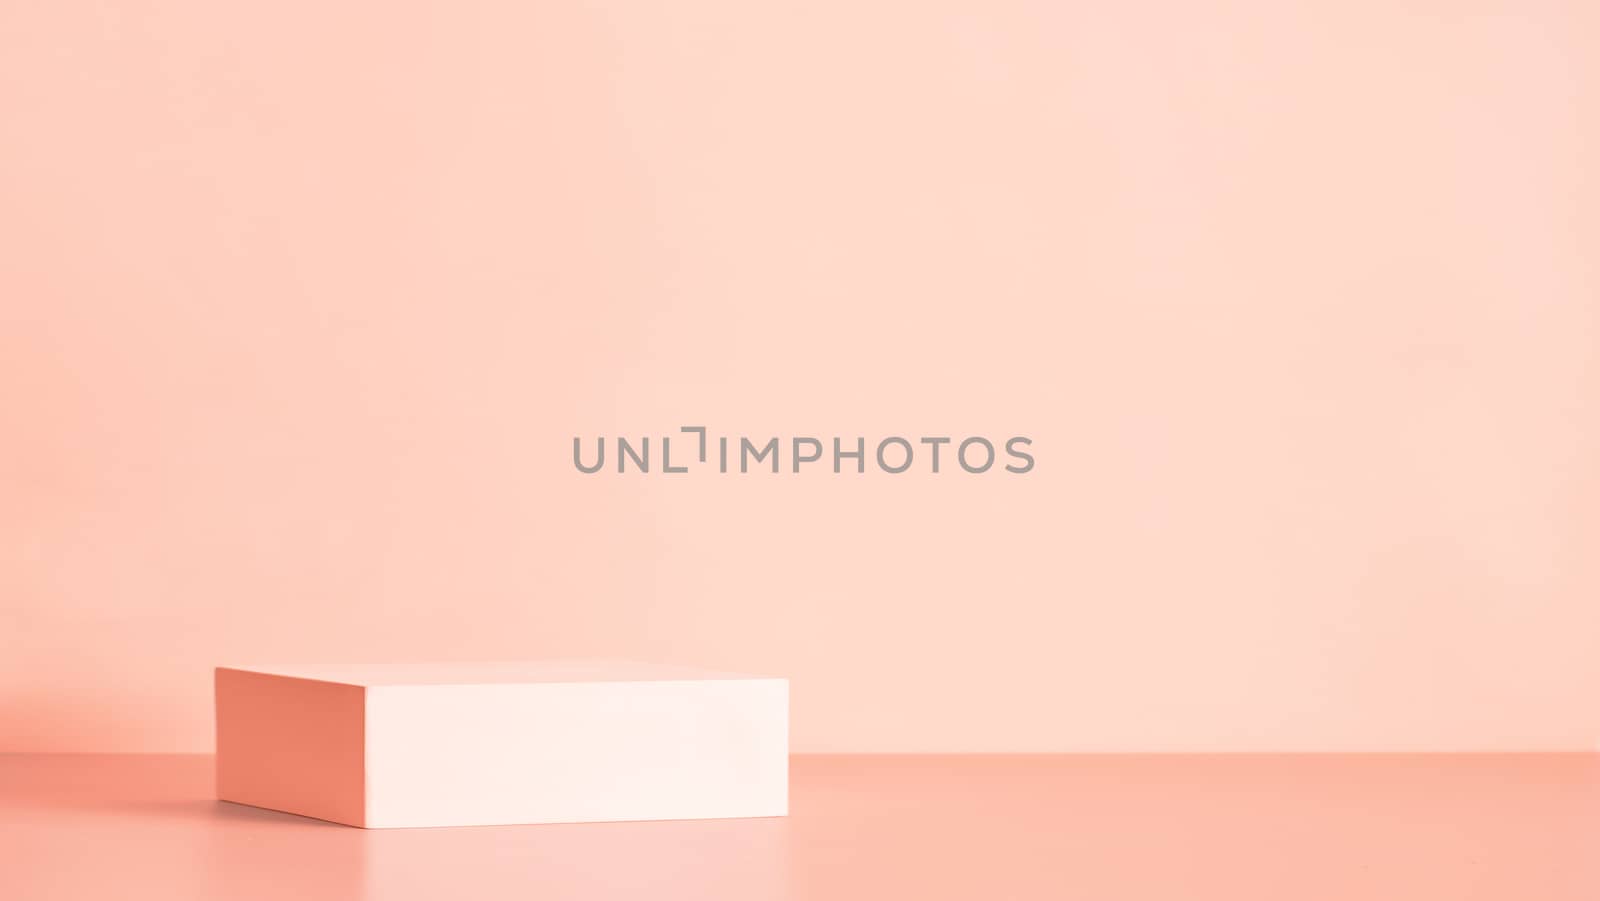 Abstract background for branding, identity and packaging presentation. Light yellow podium on coral pink paper background. Copy space for text, design or mock up product